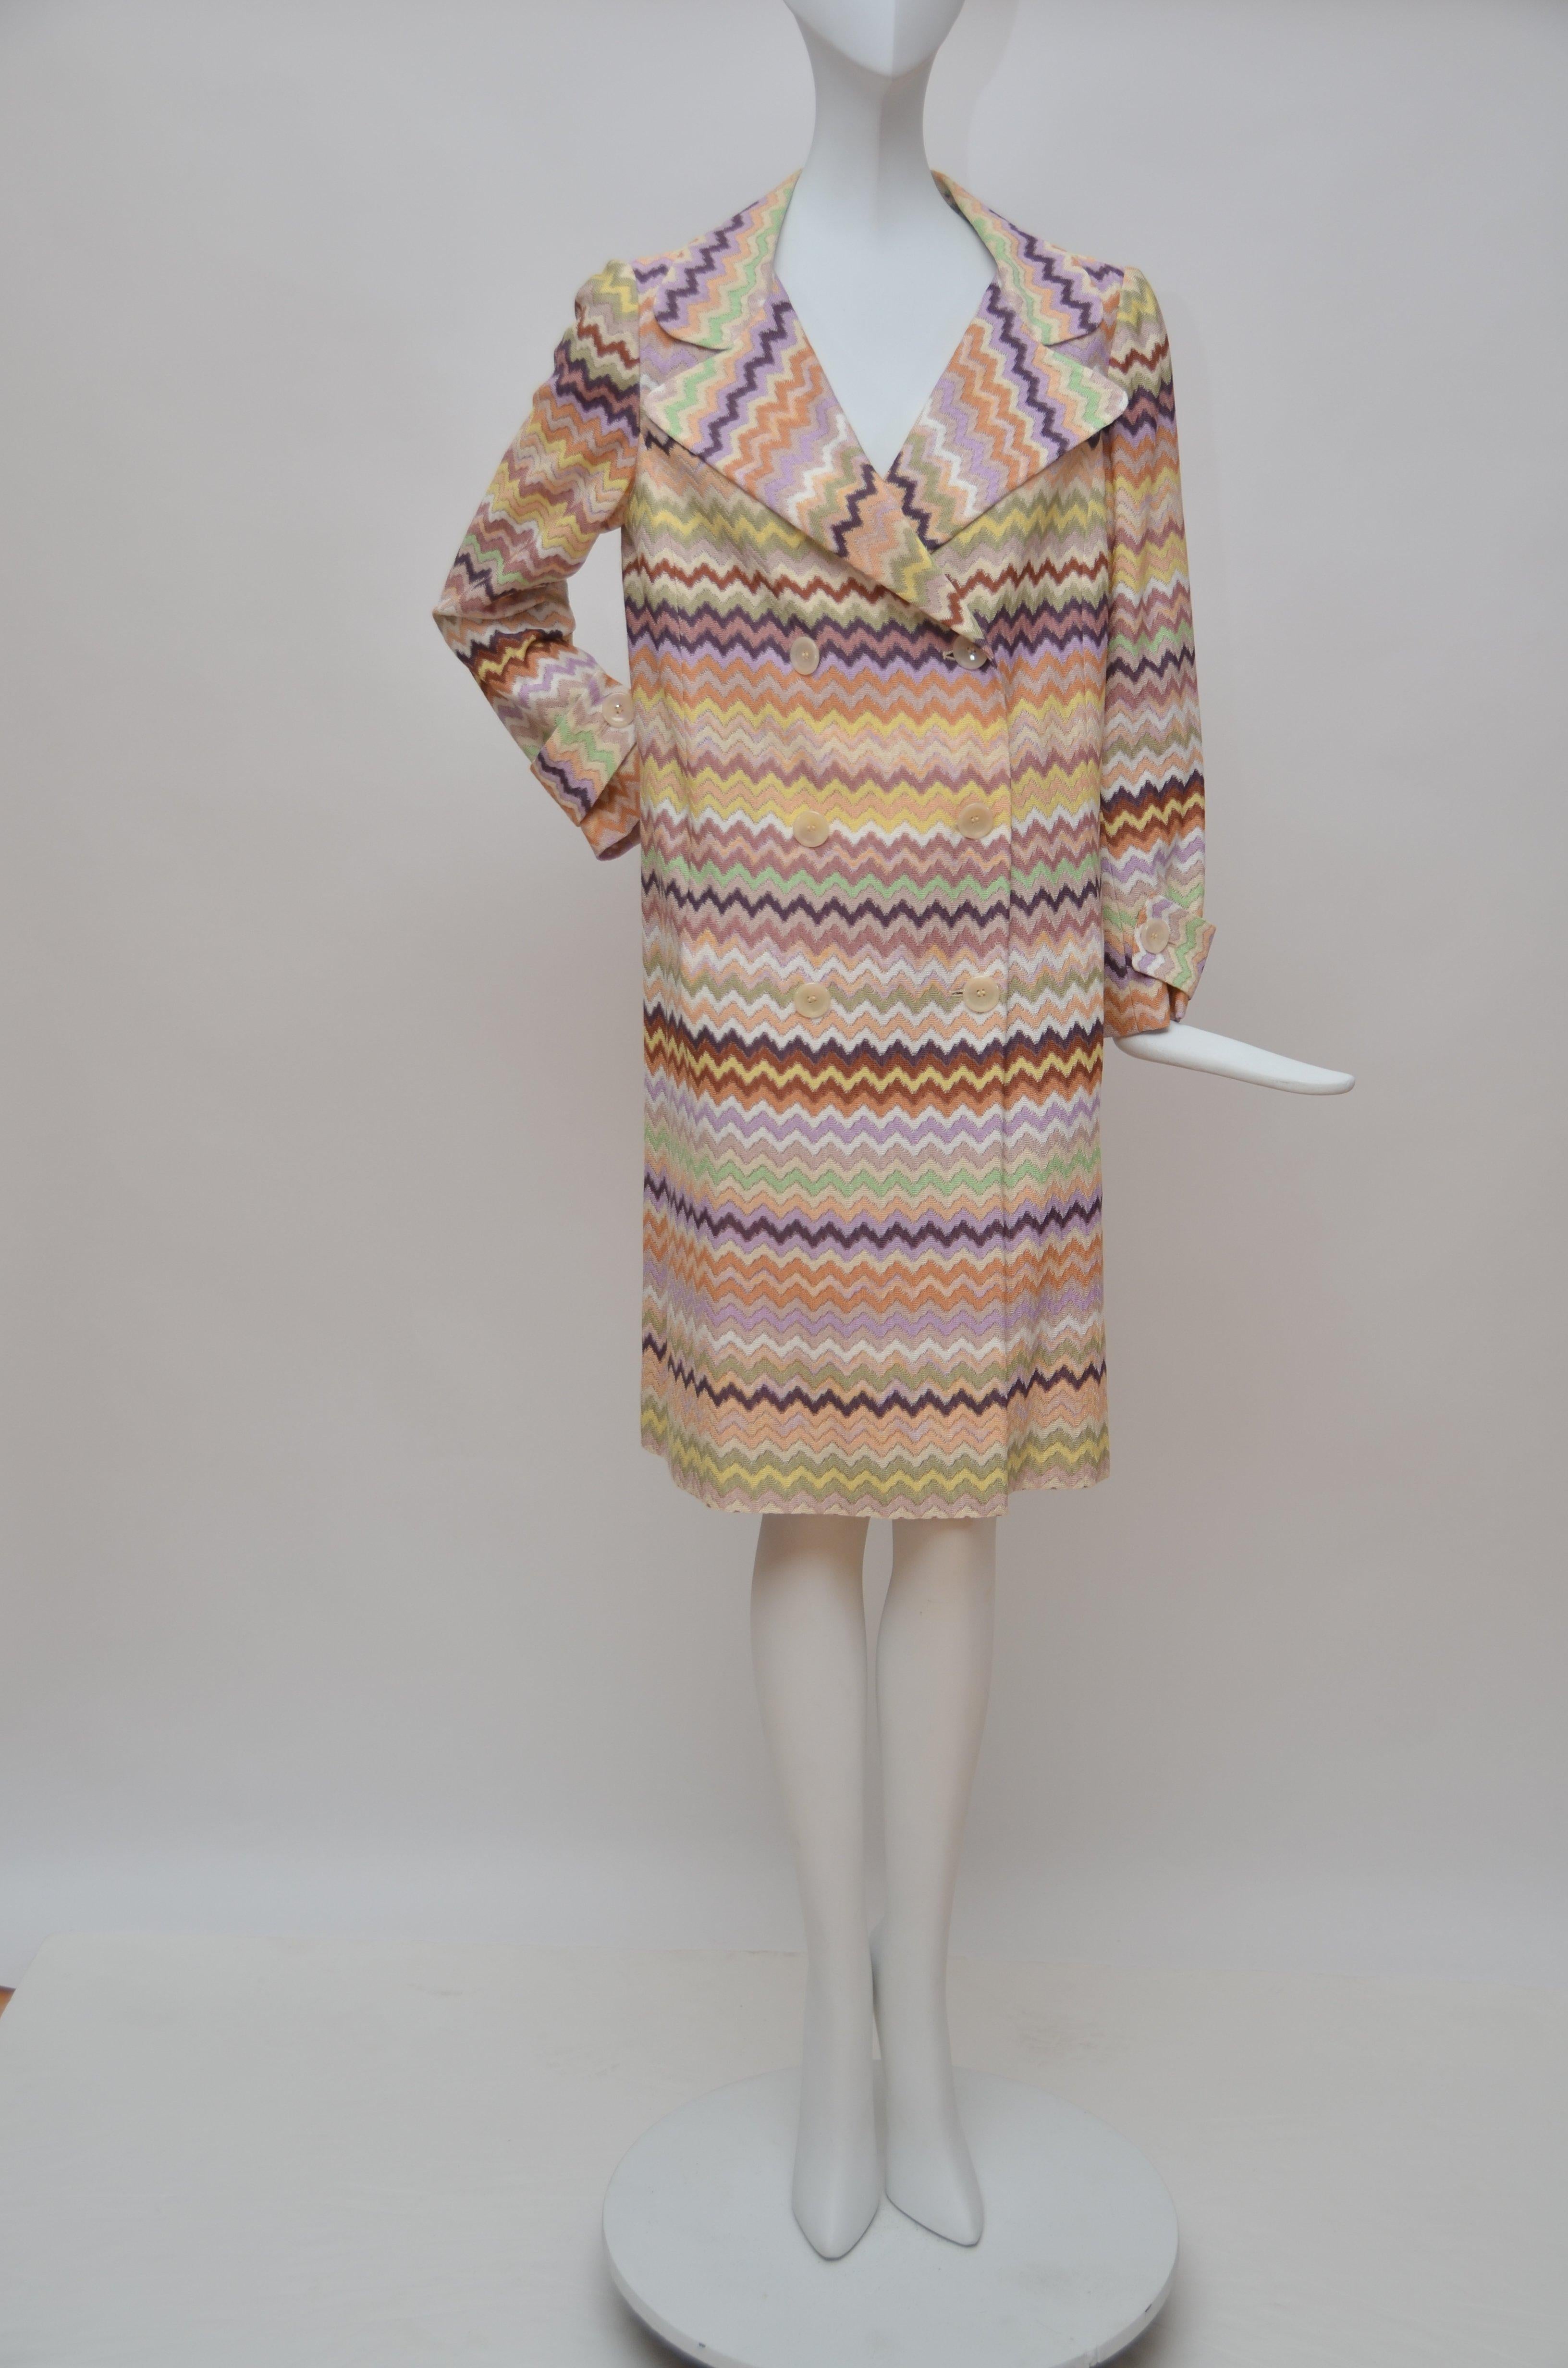 Missoni coat lined in silk
No size label
Condition is excellent ,looks unworn
Photographed on mannequin size 2US

FINAL SALE.